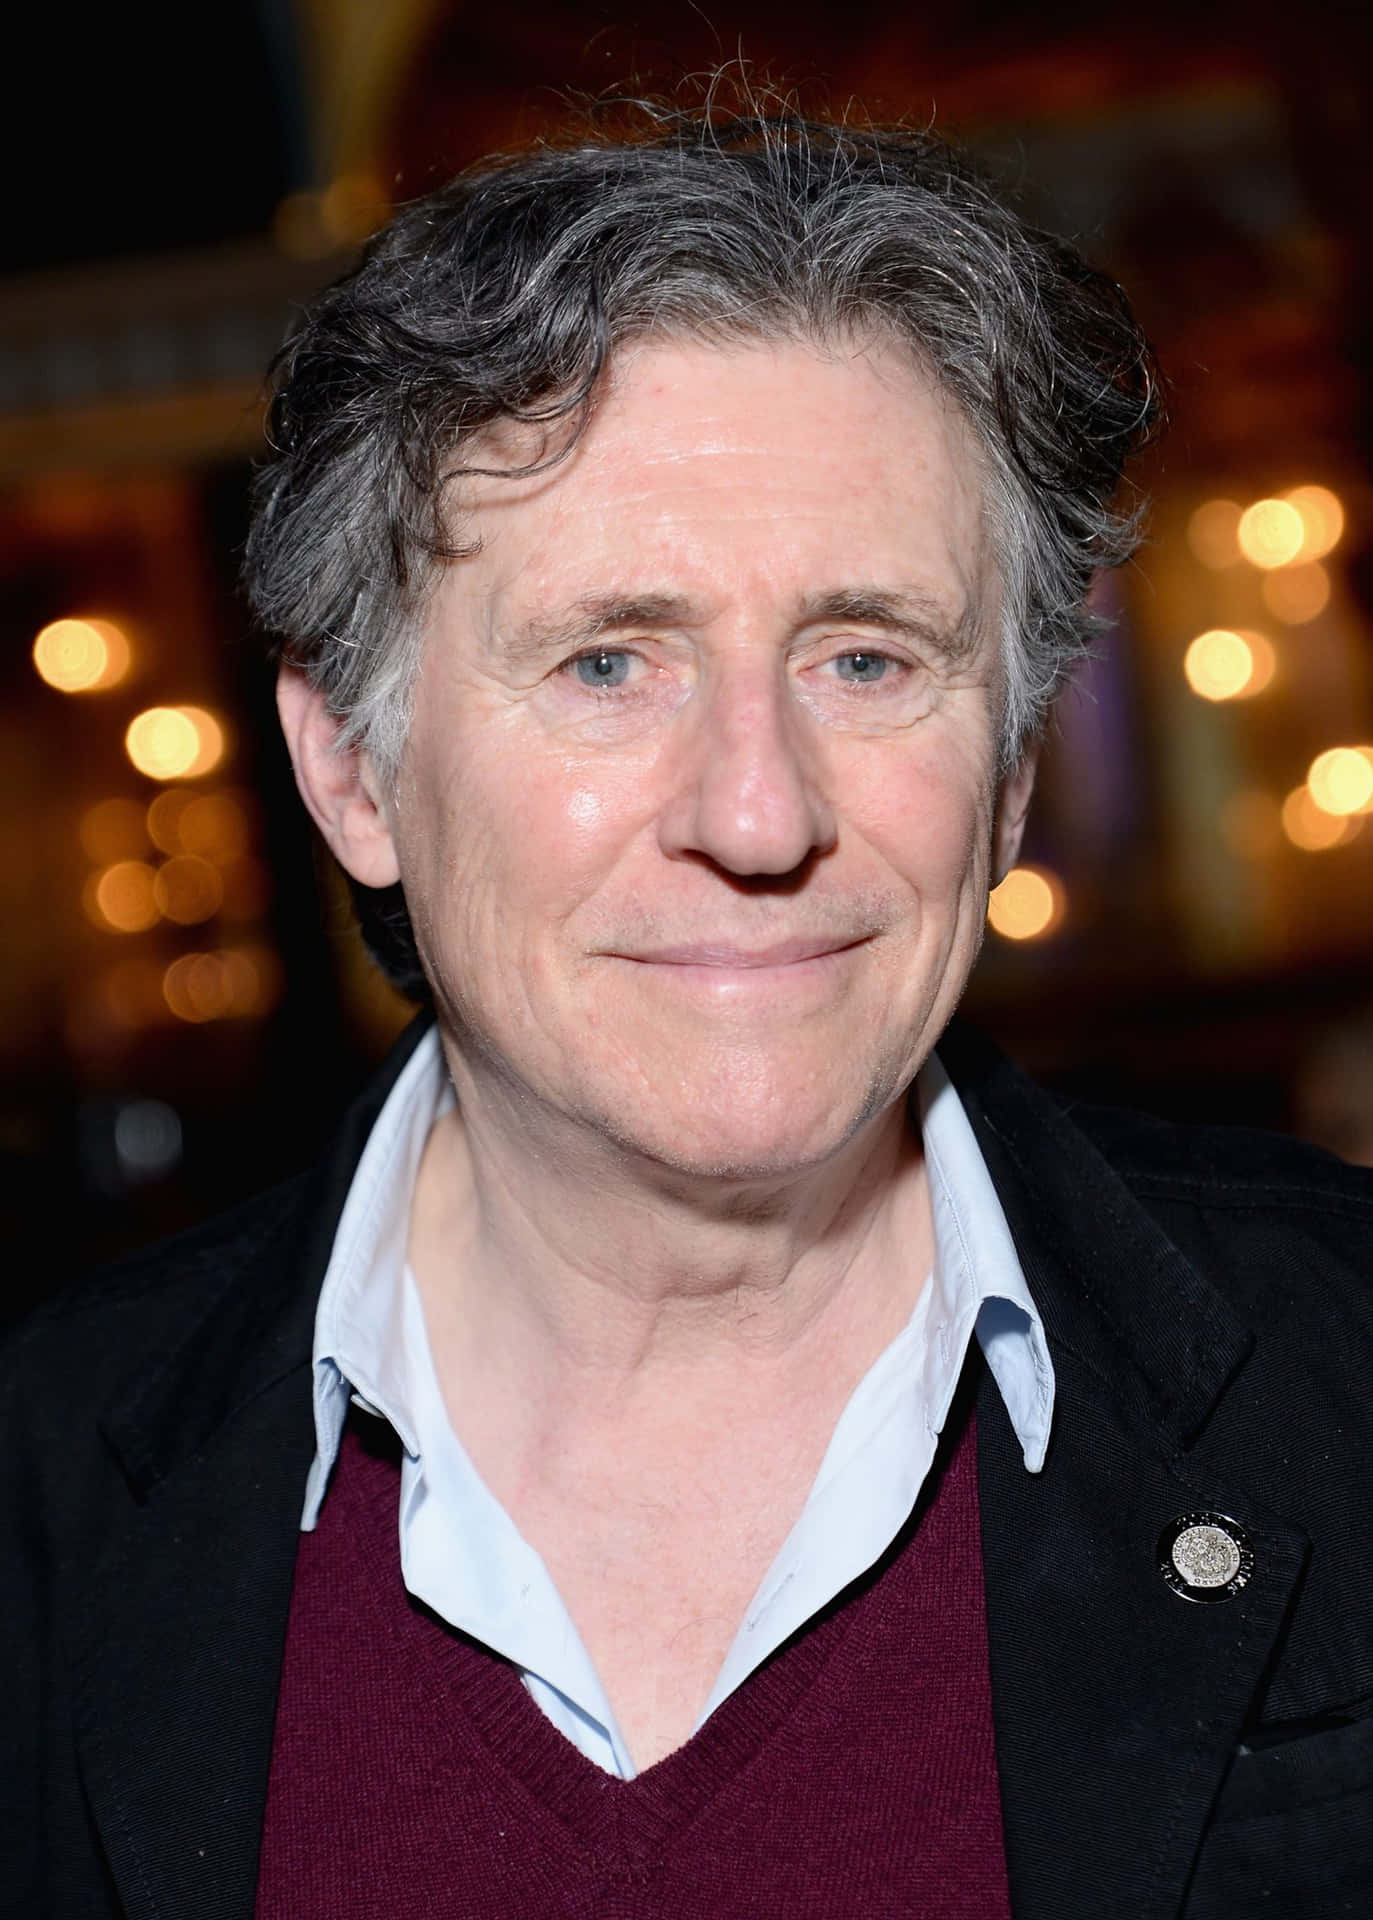 Actorgabriel Byrne Would Make An Excellent Addition To Your Computer Or Mobile Wallpaper. Fondo de pantalla